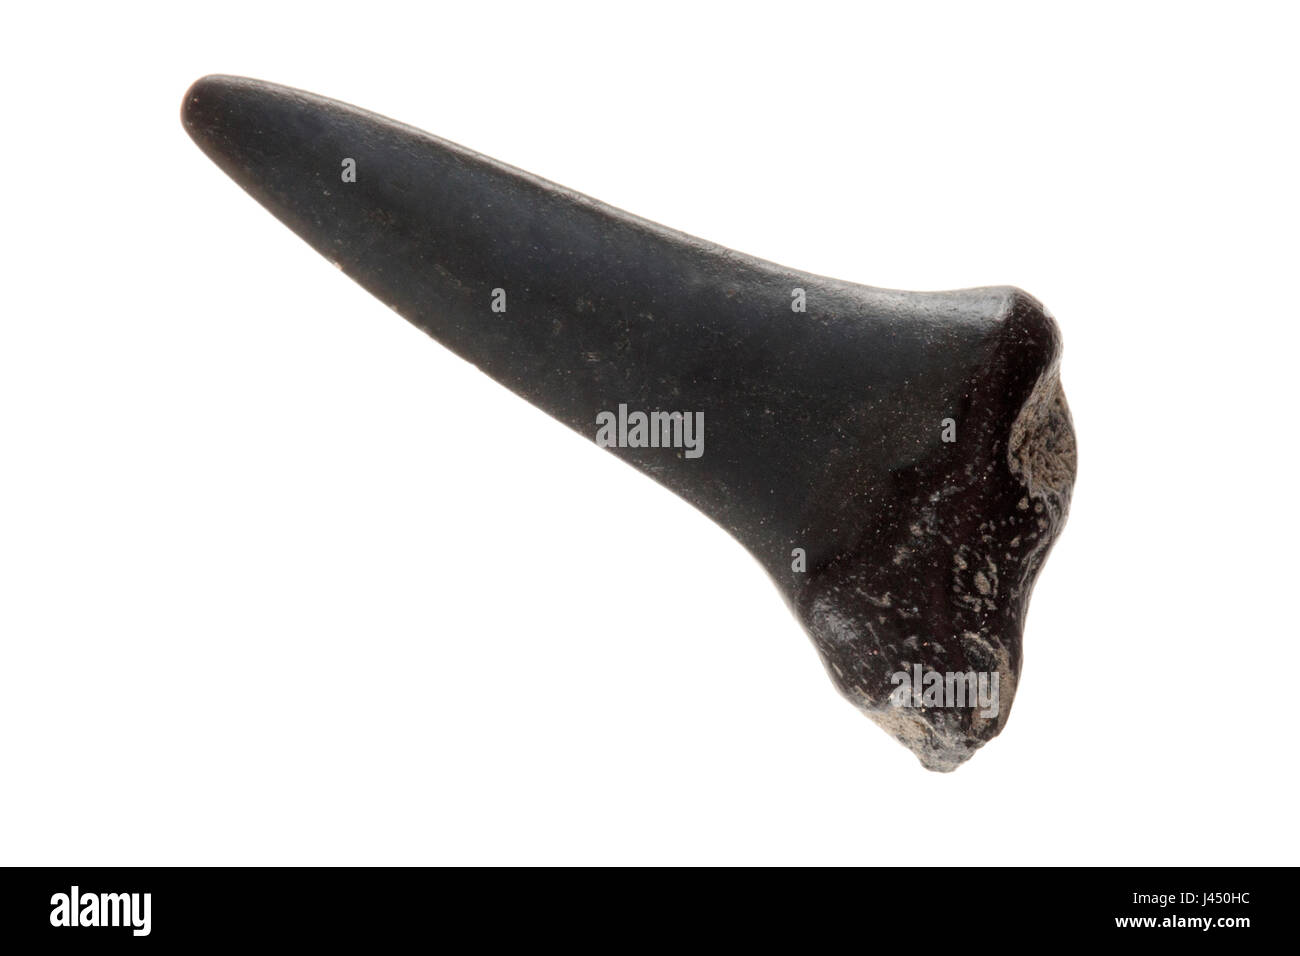 Fossil shark teeth isolated against a white background; Stock Photo